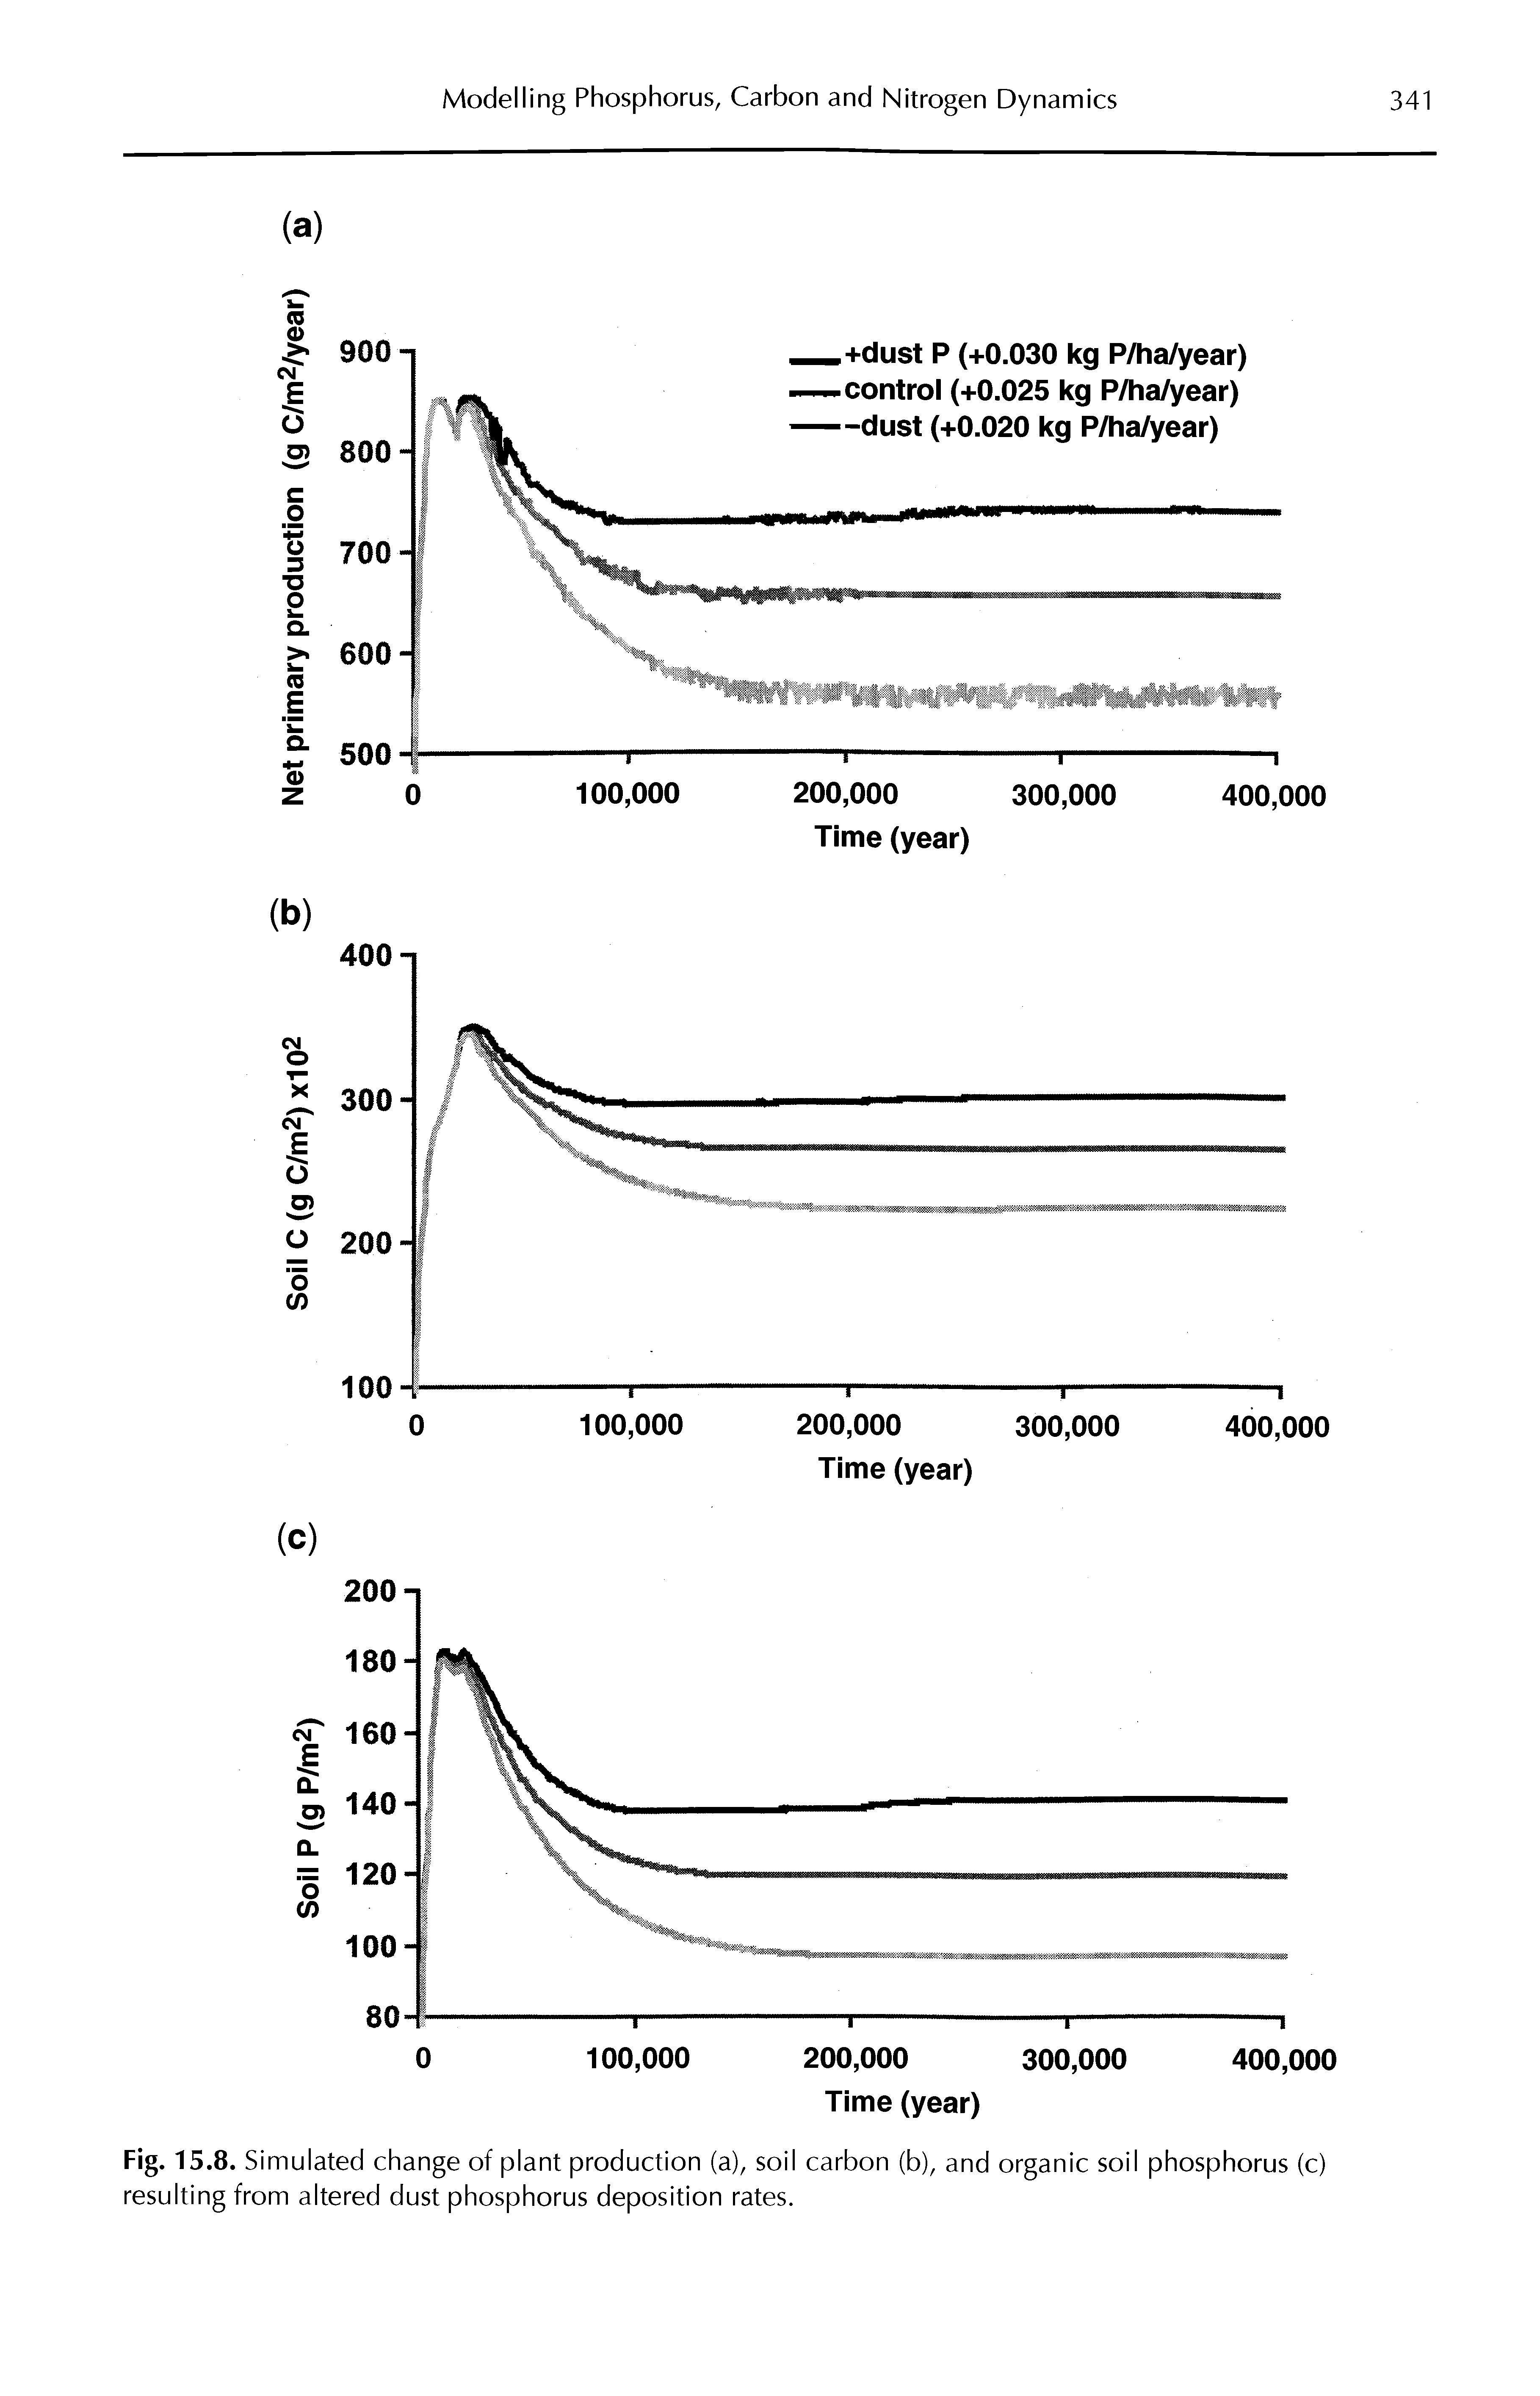 Fig. 15.8. Simulated change of plant production (a), soil carbon (b), and organic soil phosphorus (c) resulting from altered dust phosphorus deposition rates.